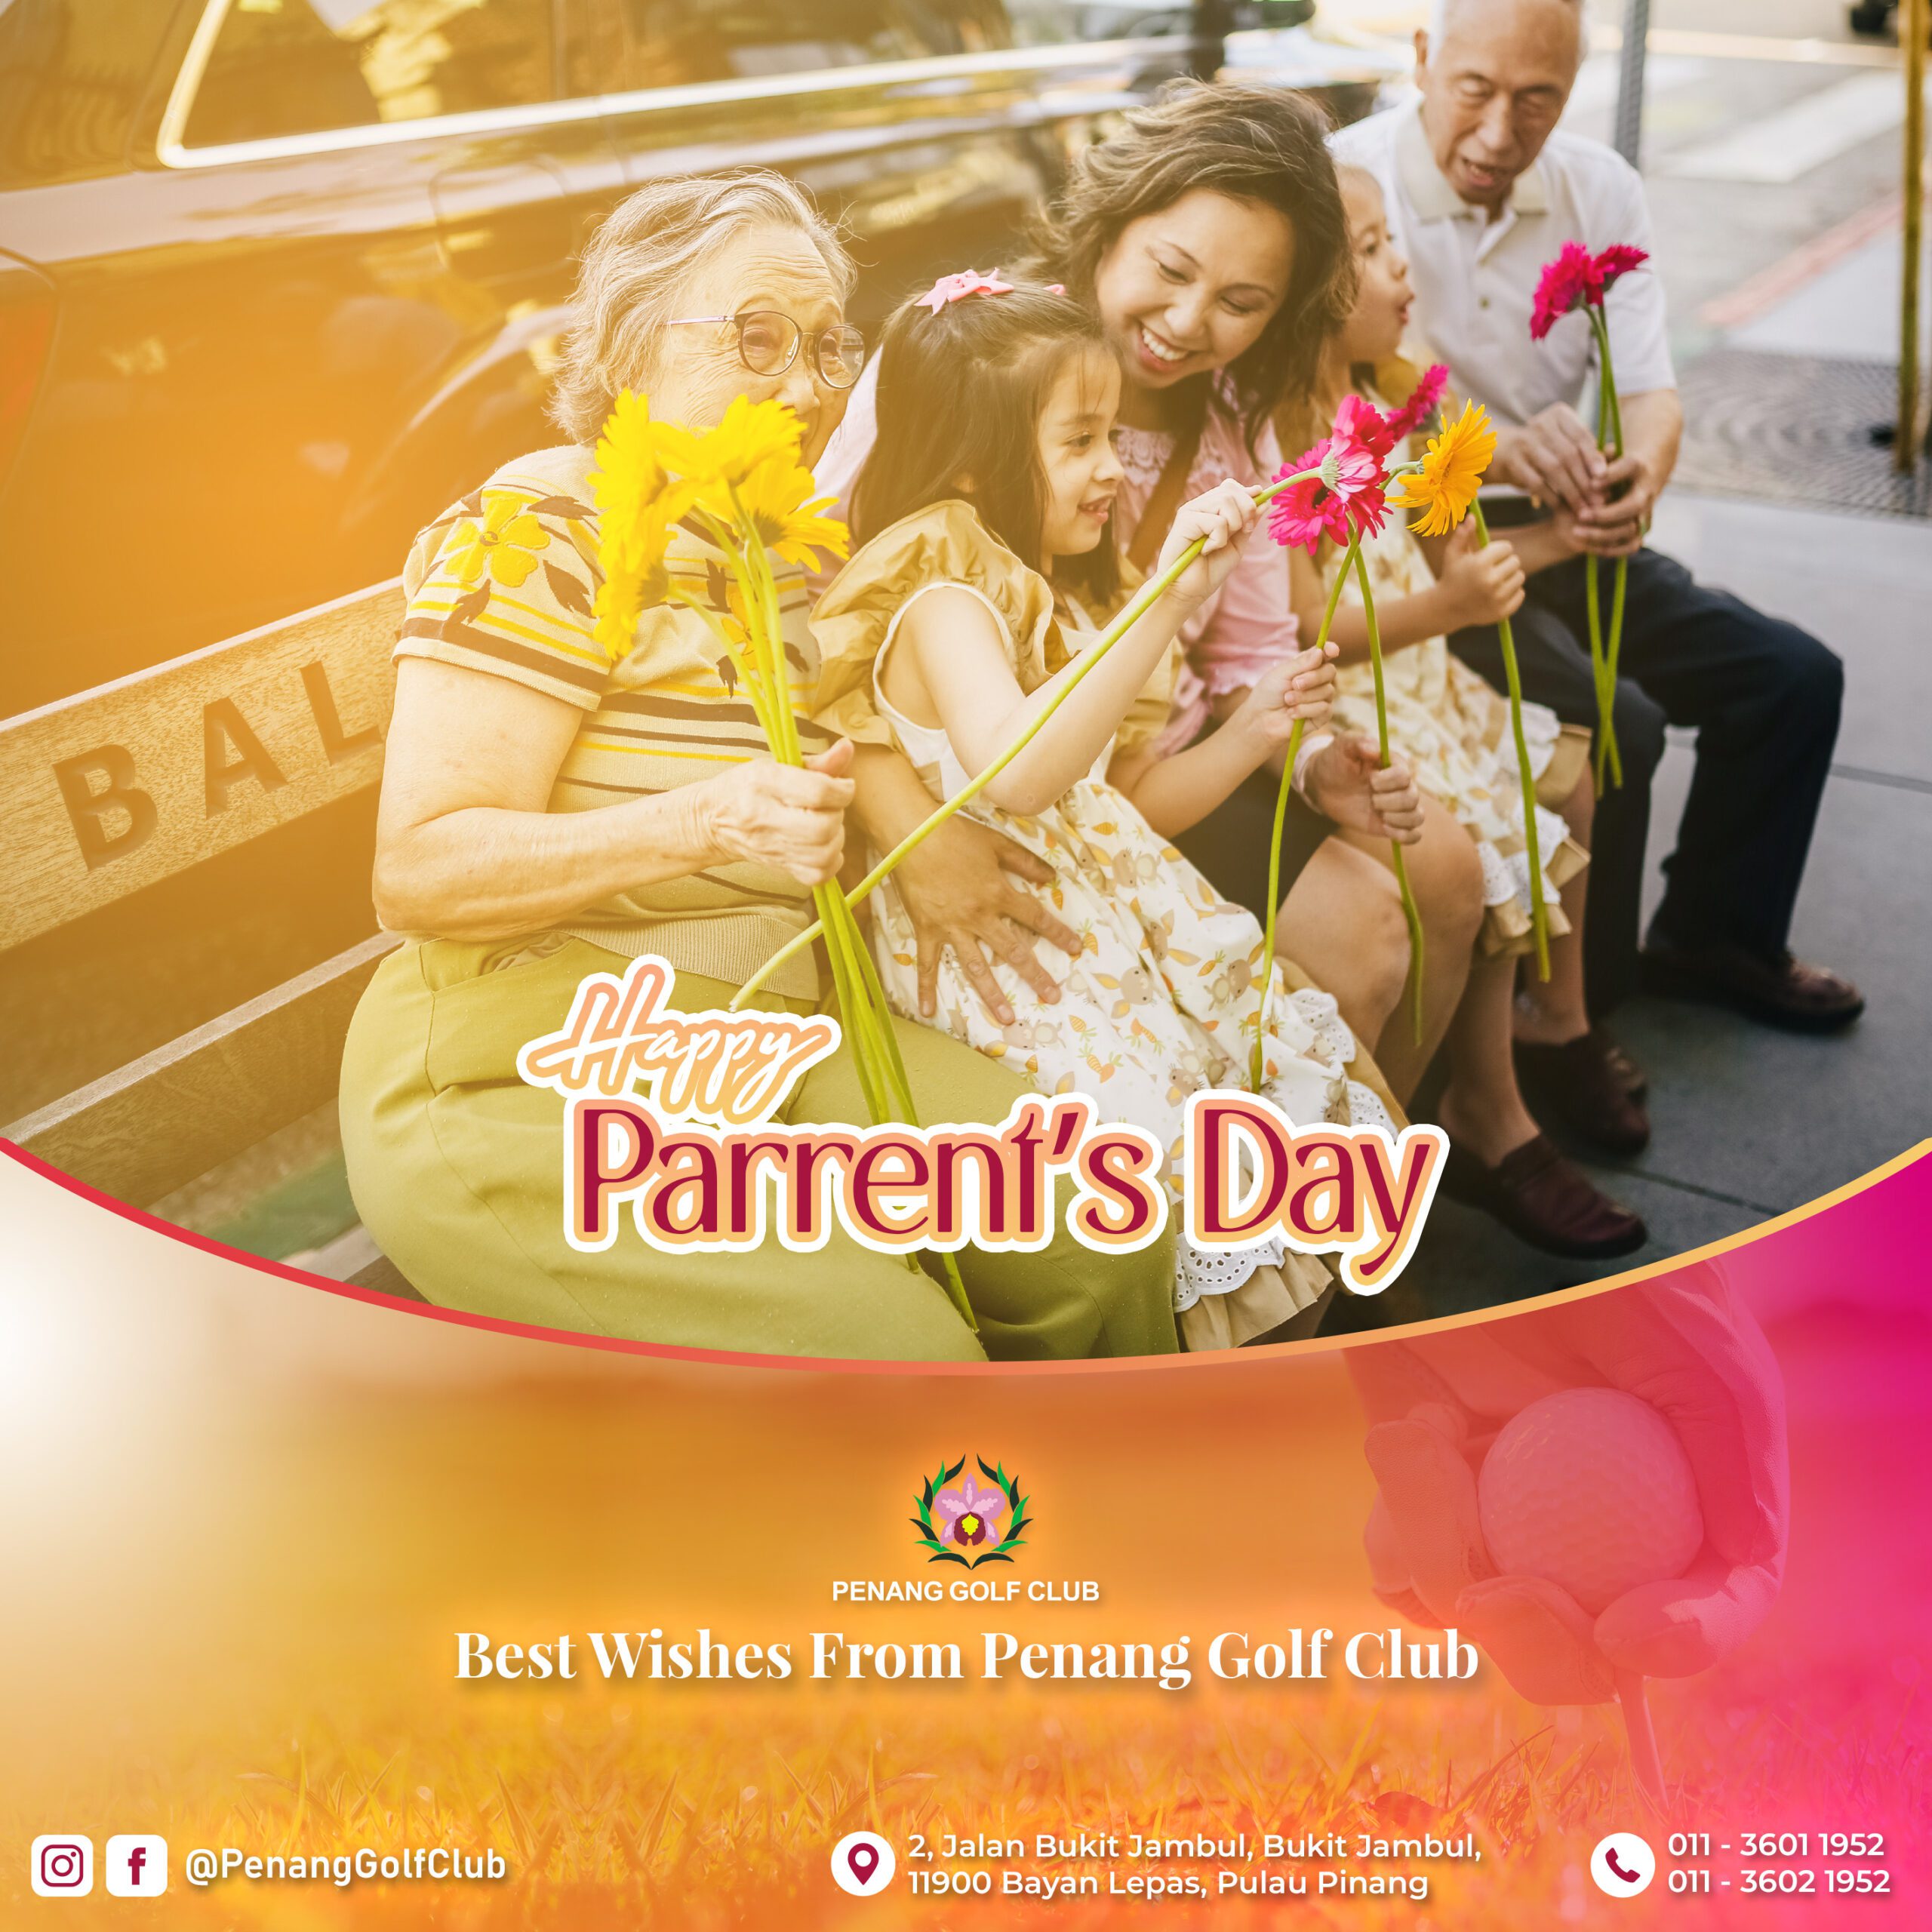 Parent’s Day Wishes – Social Media Post